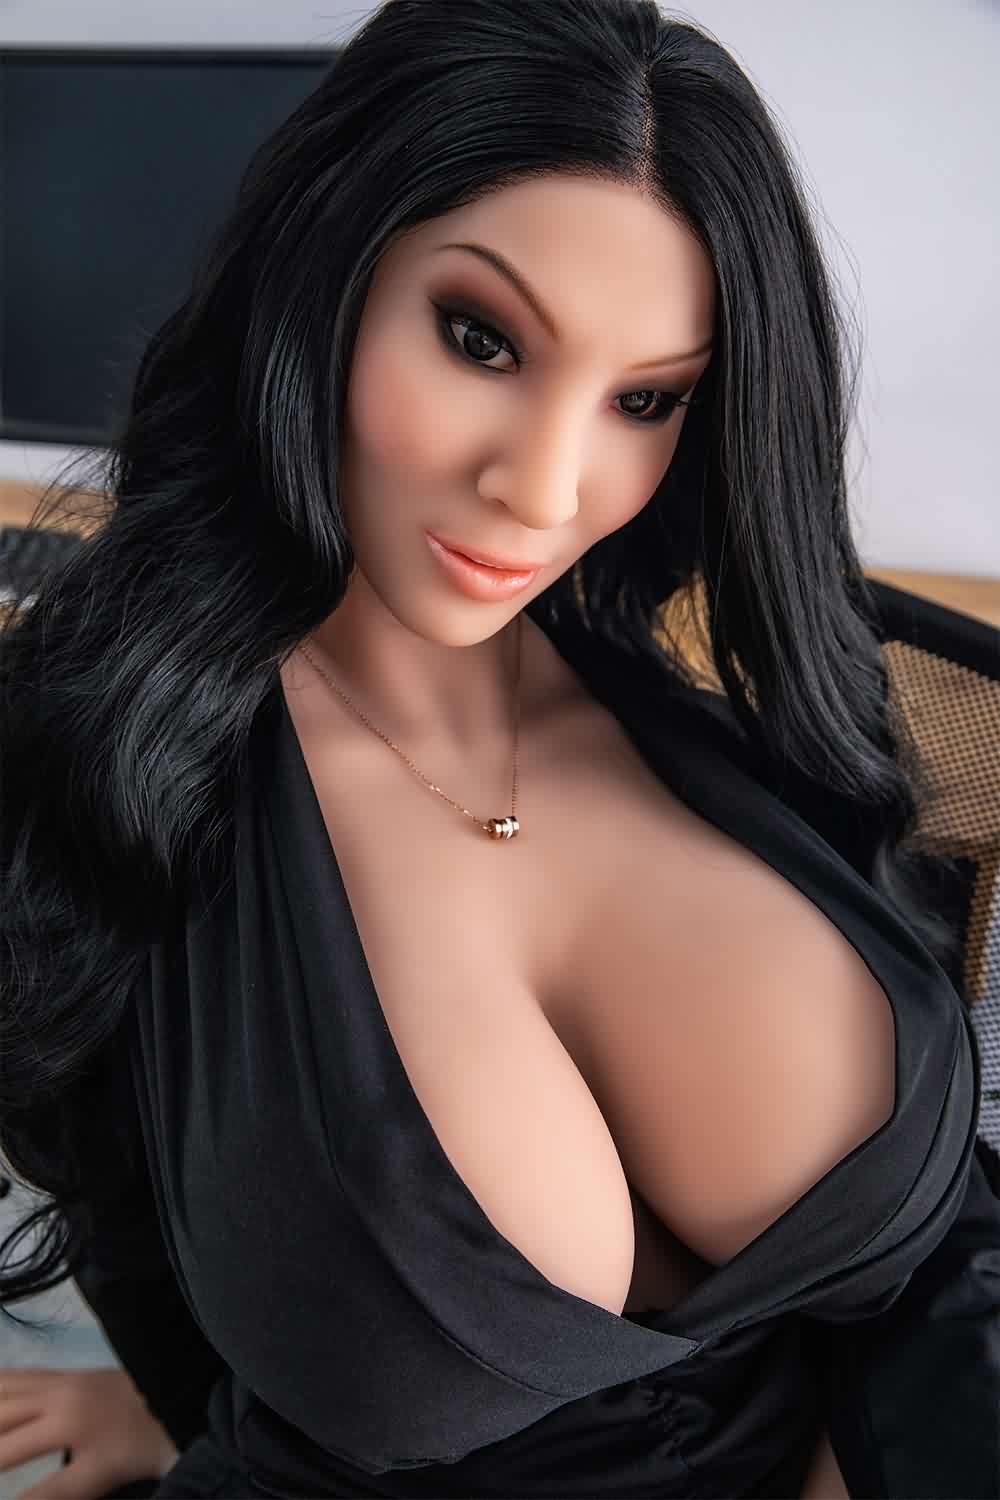 Old Lady Sex Doll image picture